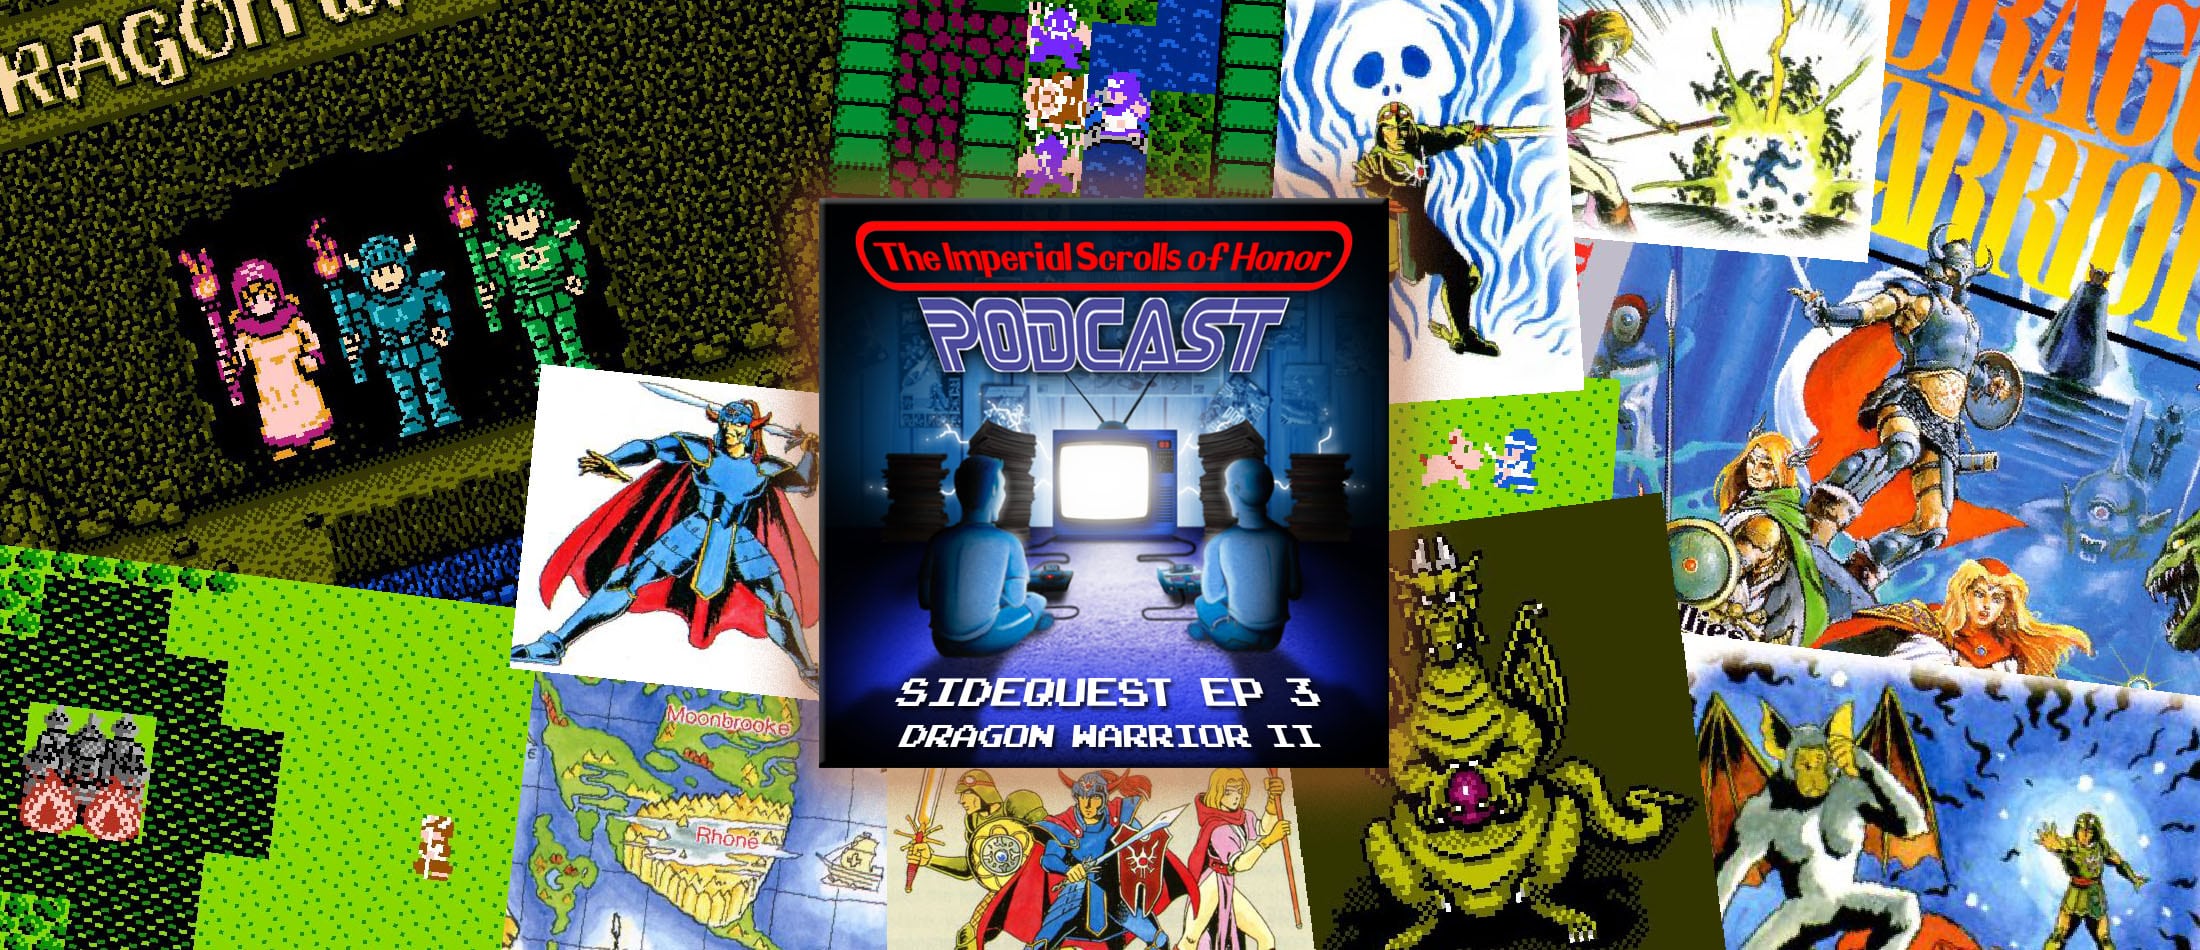 The Imperial Scrolls of Honor Podcast - SIDEQUEST: Dragon Warrior II Ep 3